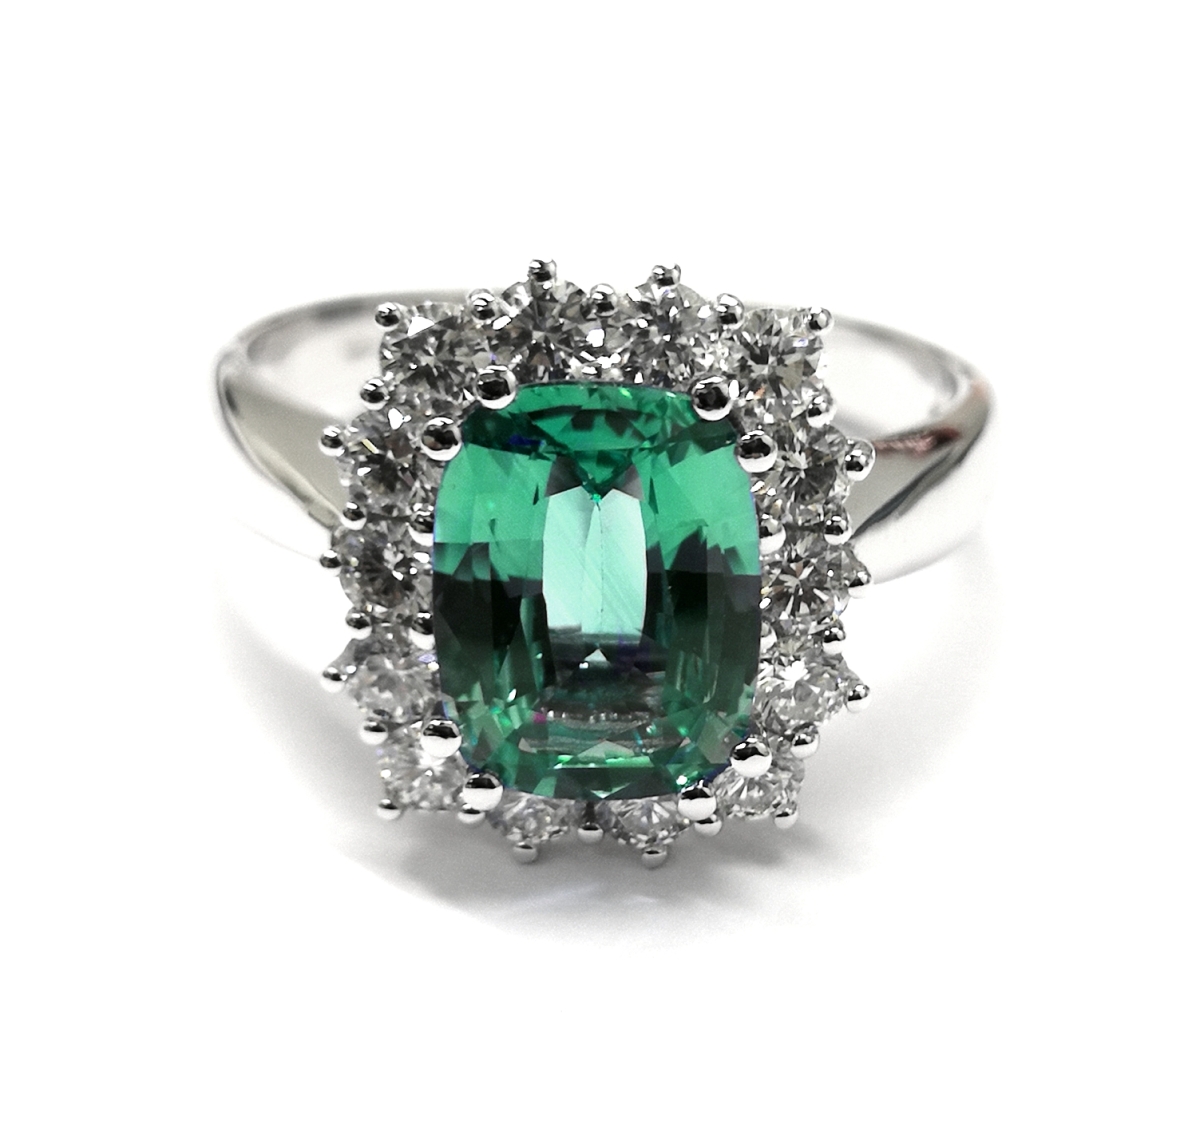 750 Mill. White Gold Ring with 0,50 Ct. Diamonds and 0,95 Ct. Emerald